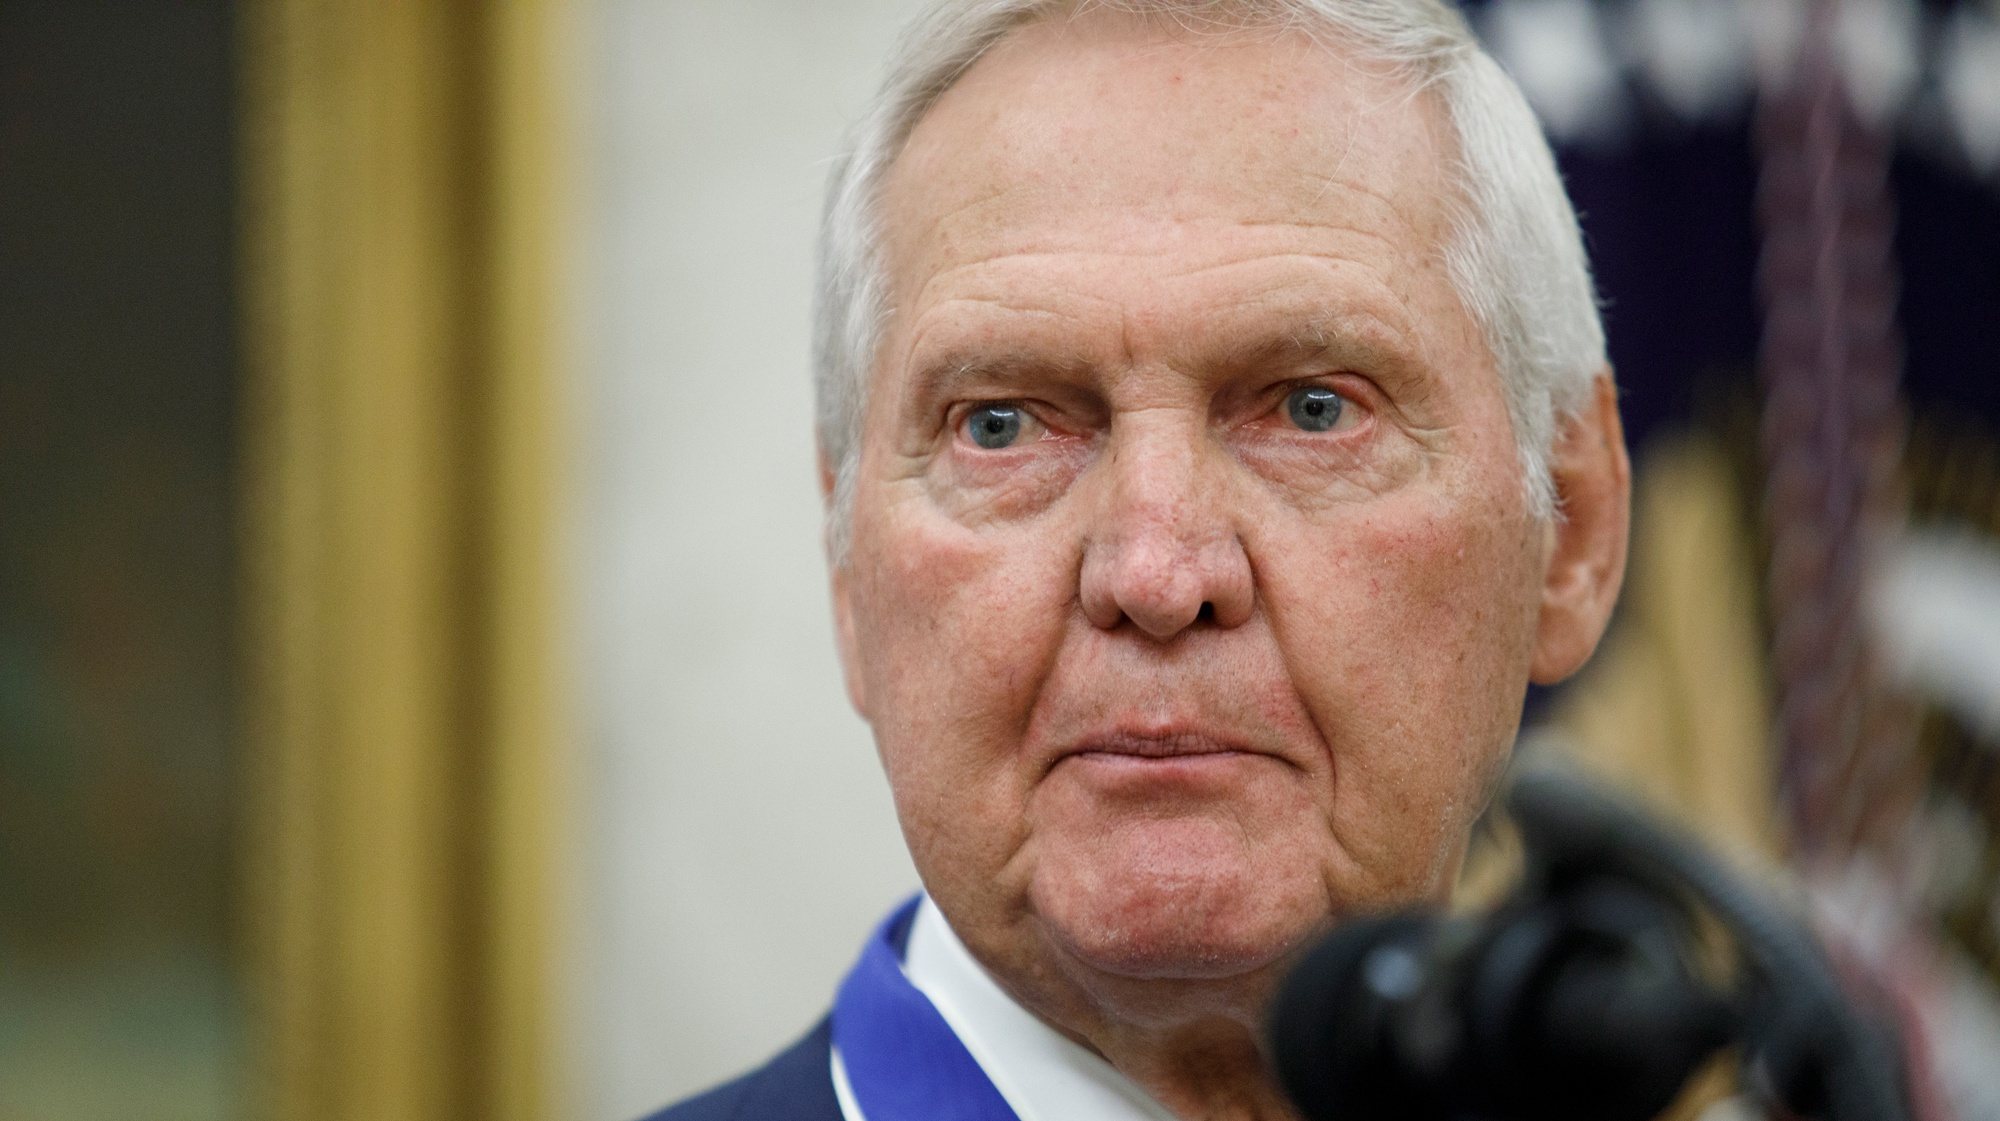 epa07821270 NBA Hall of Fame member Jerry West after receivng the Presidential Medal of Freedom from US President Donald J. Trump during a ceremony inside of the Oval Office at the White House in Washington, DC, USA, 05 September 2019. West, 81, graduated from West Virginia University and played fourteen seasons with the Los Angeles Lakers.  EPA/TOM BRENNER / POOL